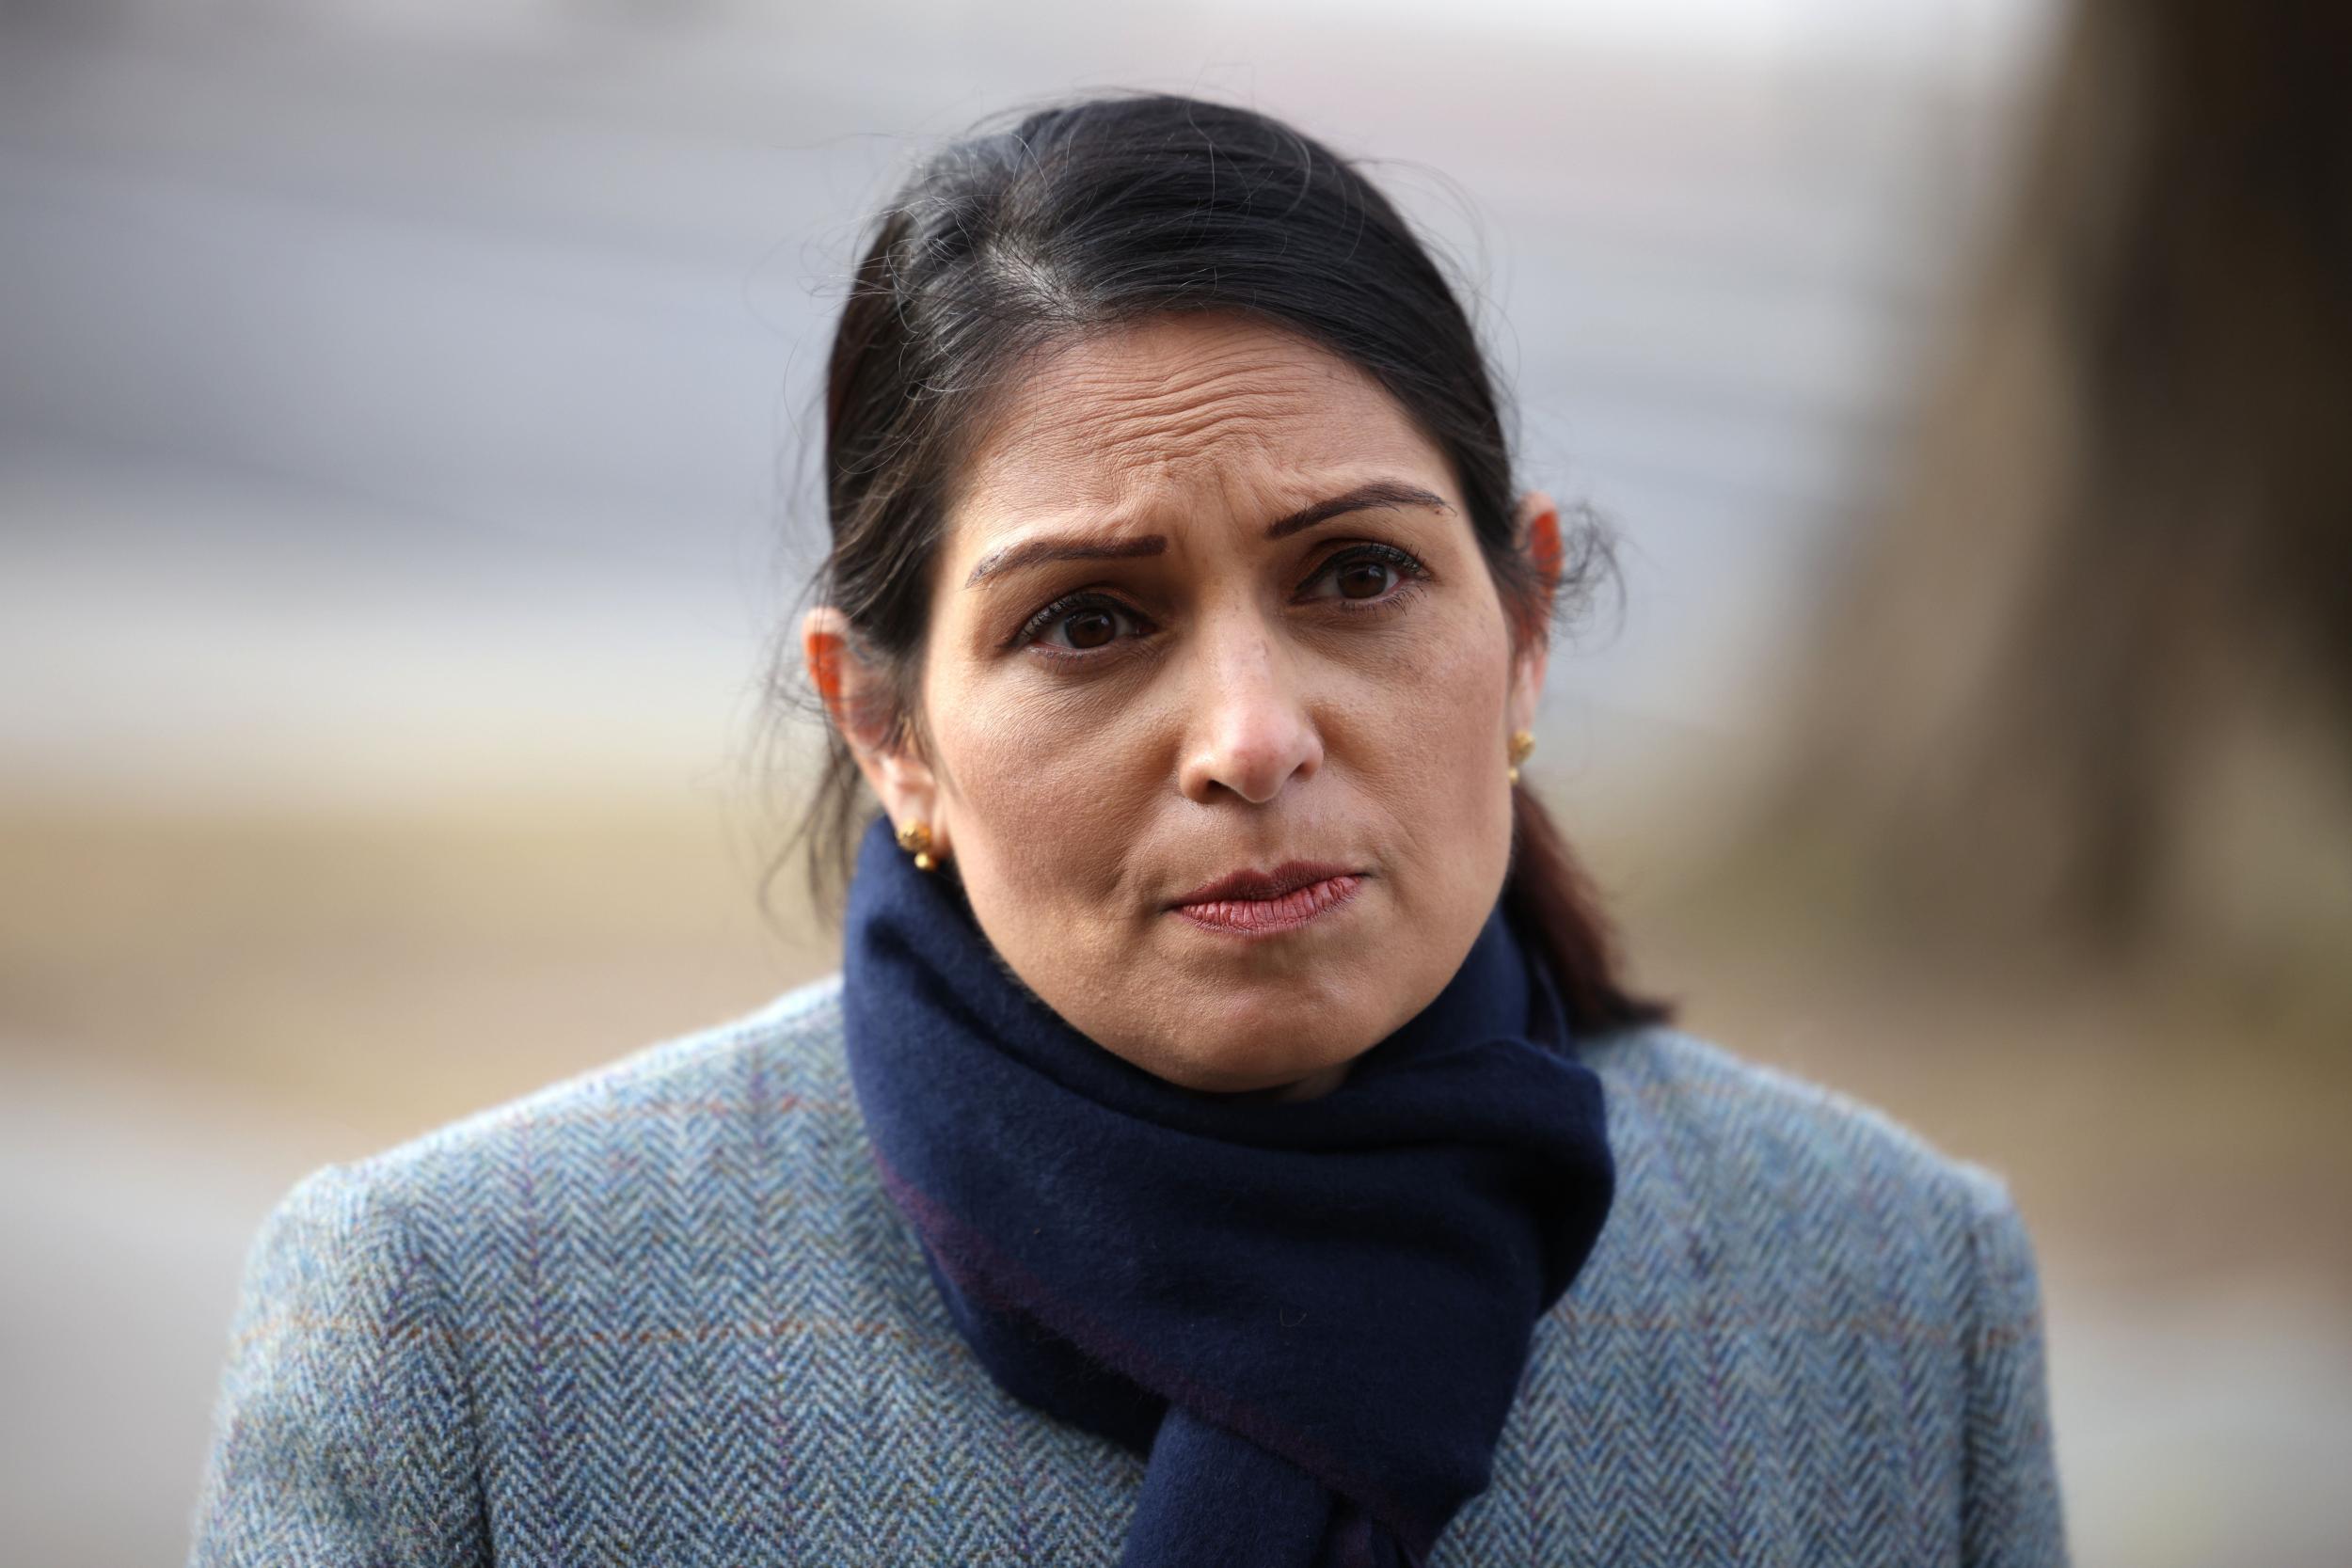 Priti Patel portrays Britain as beset by enemies at home and abroad